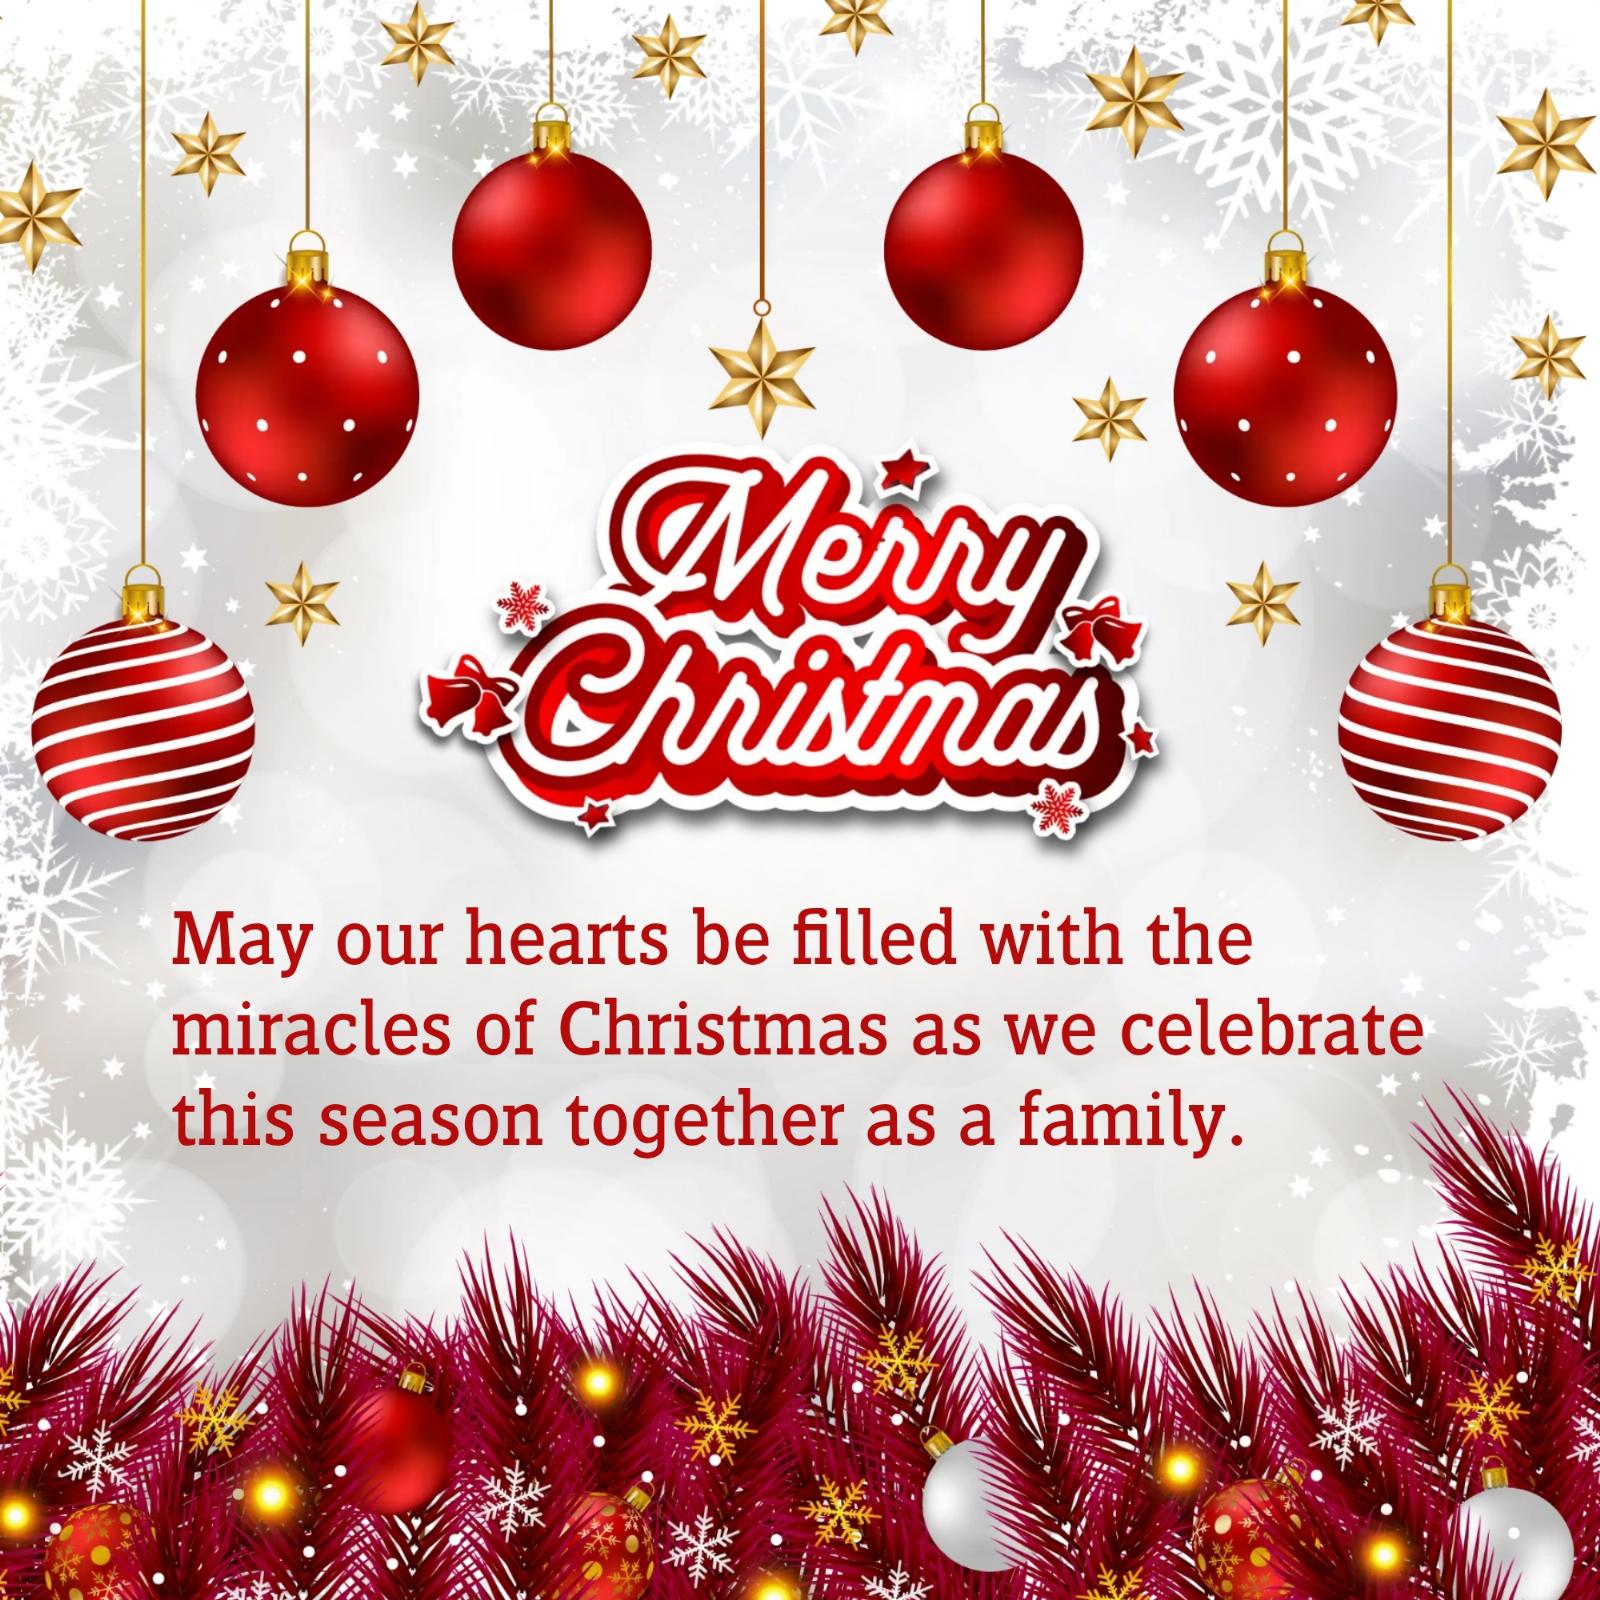 May our hearts be filled with the miracles of Christmas